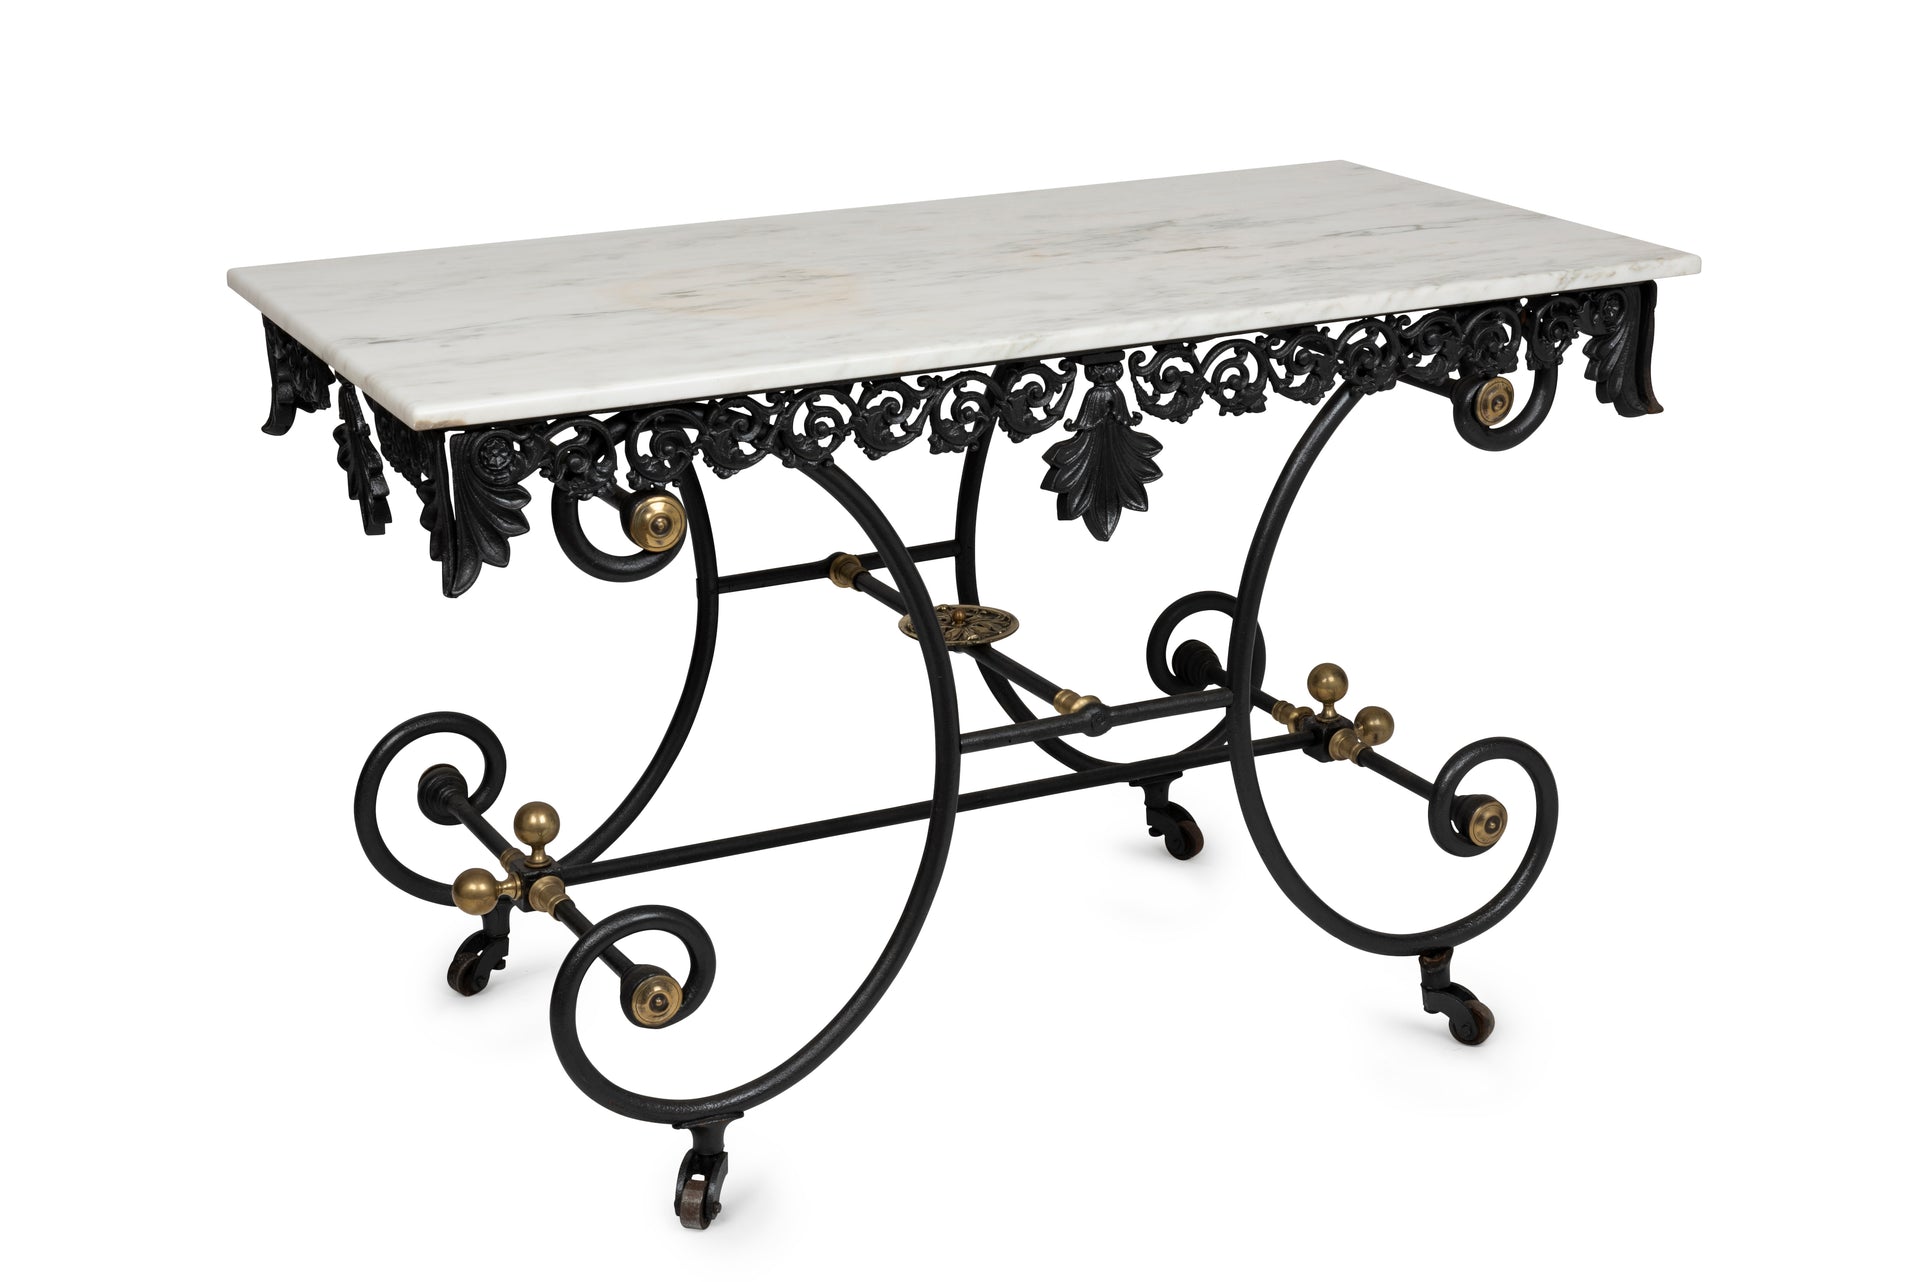 SOLD An exceptional cast iron, Carrara marble and brass detailed Patisserie table, French 19th Century